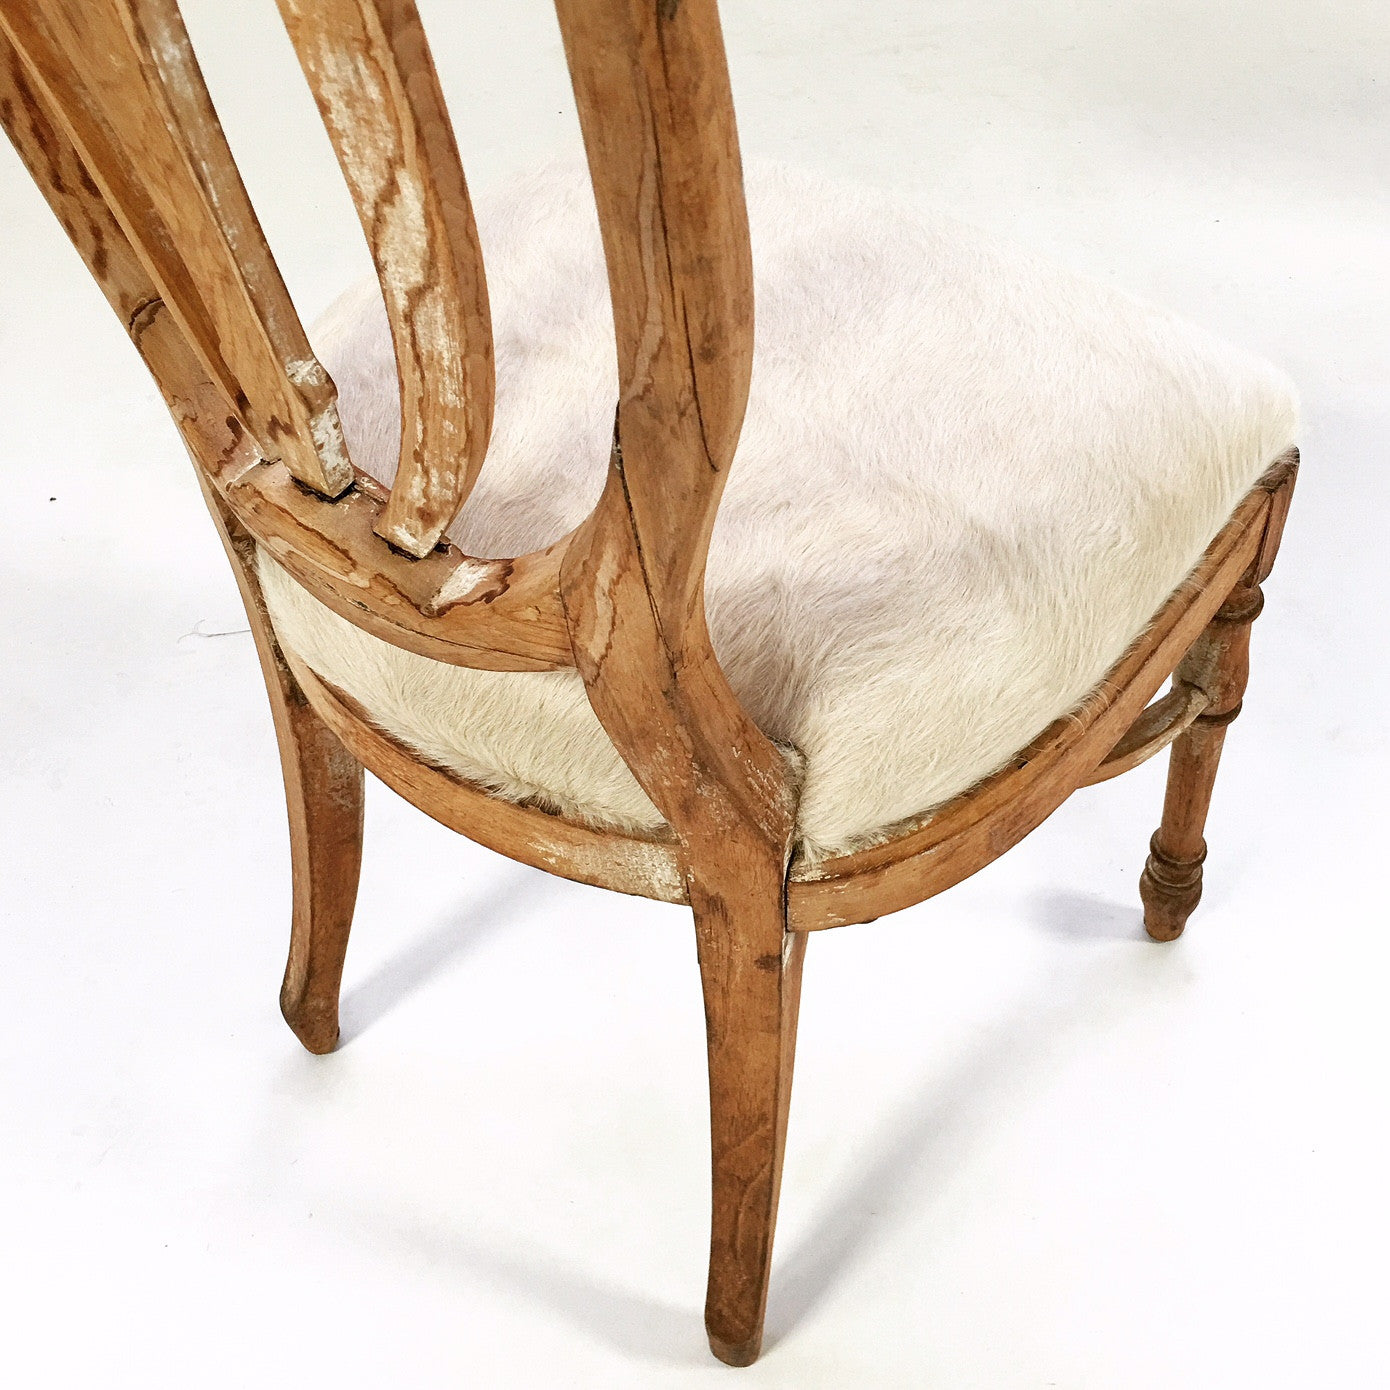 Maple Dining Chairs in Brazilian Cowhide, set of 6 - FORSYTH